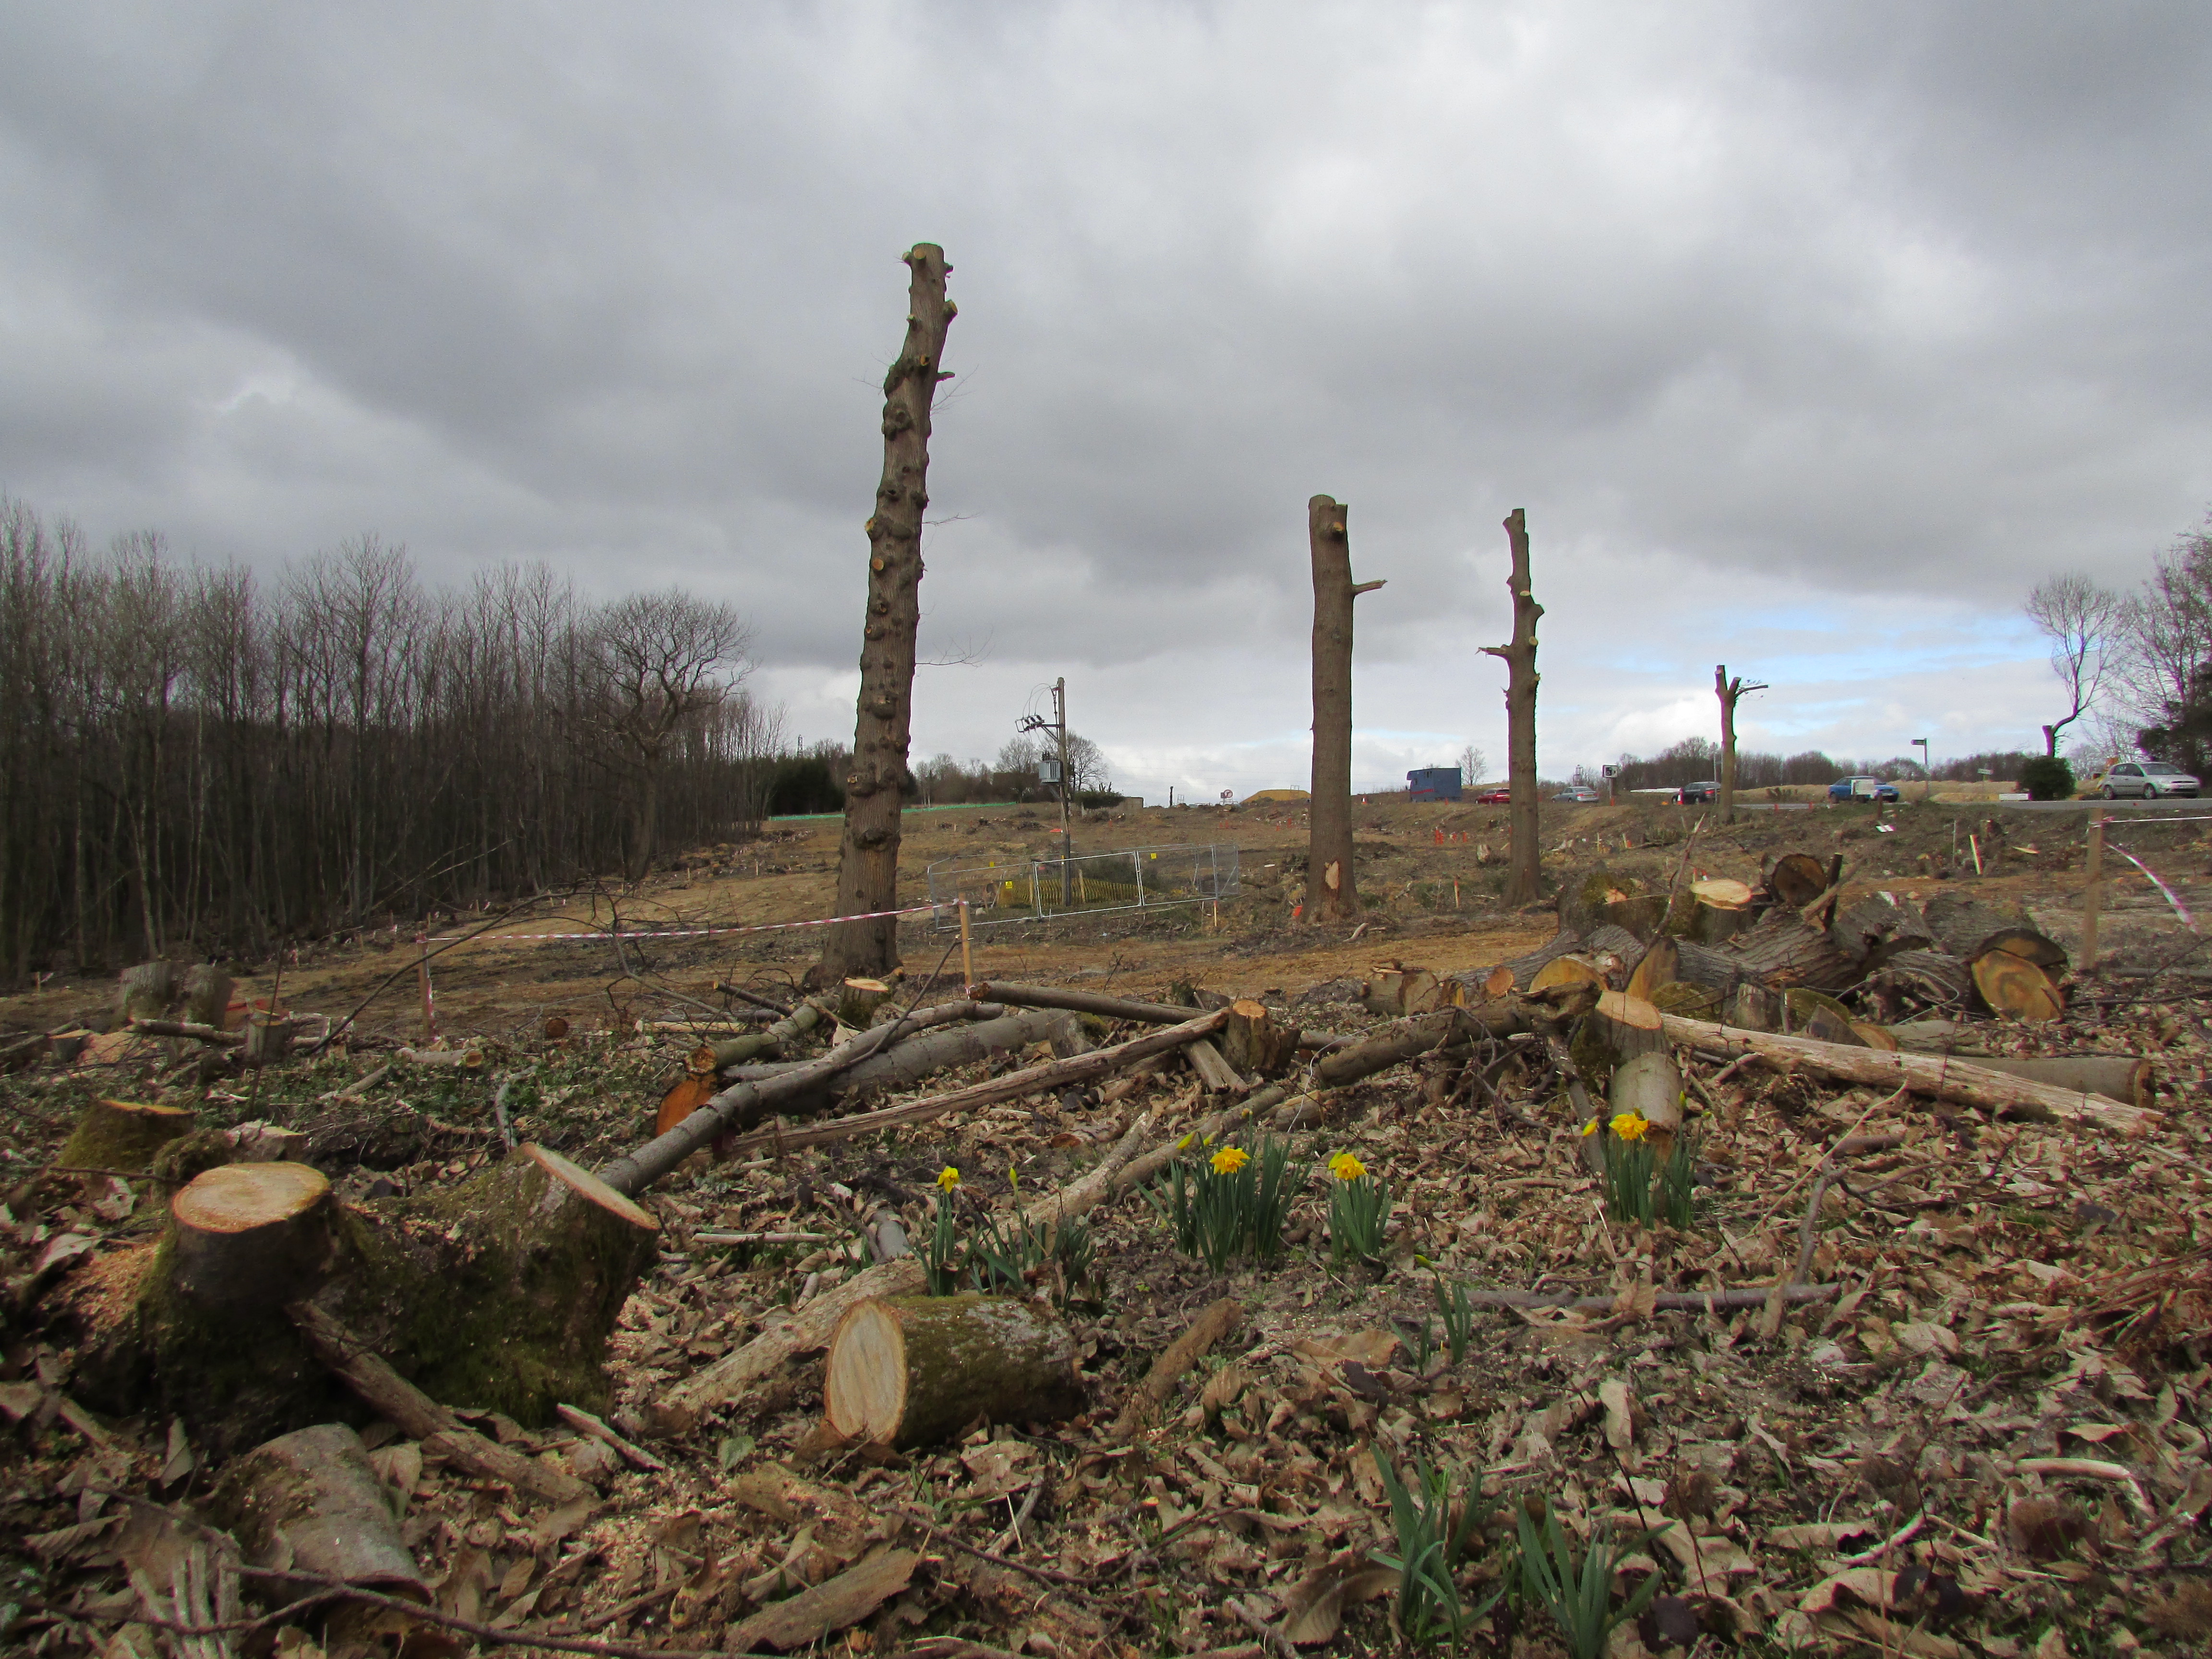 Woodland cleared for road development